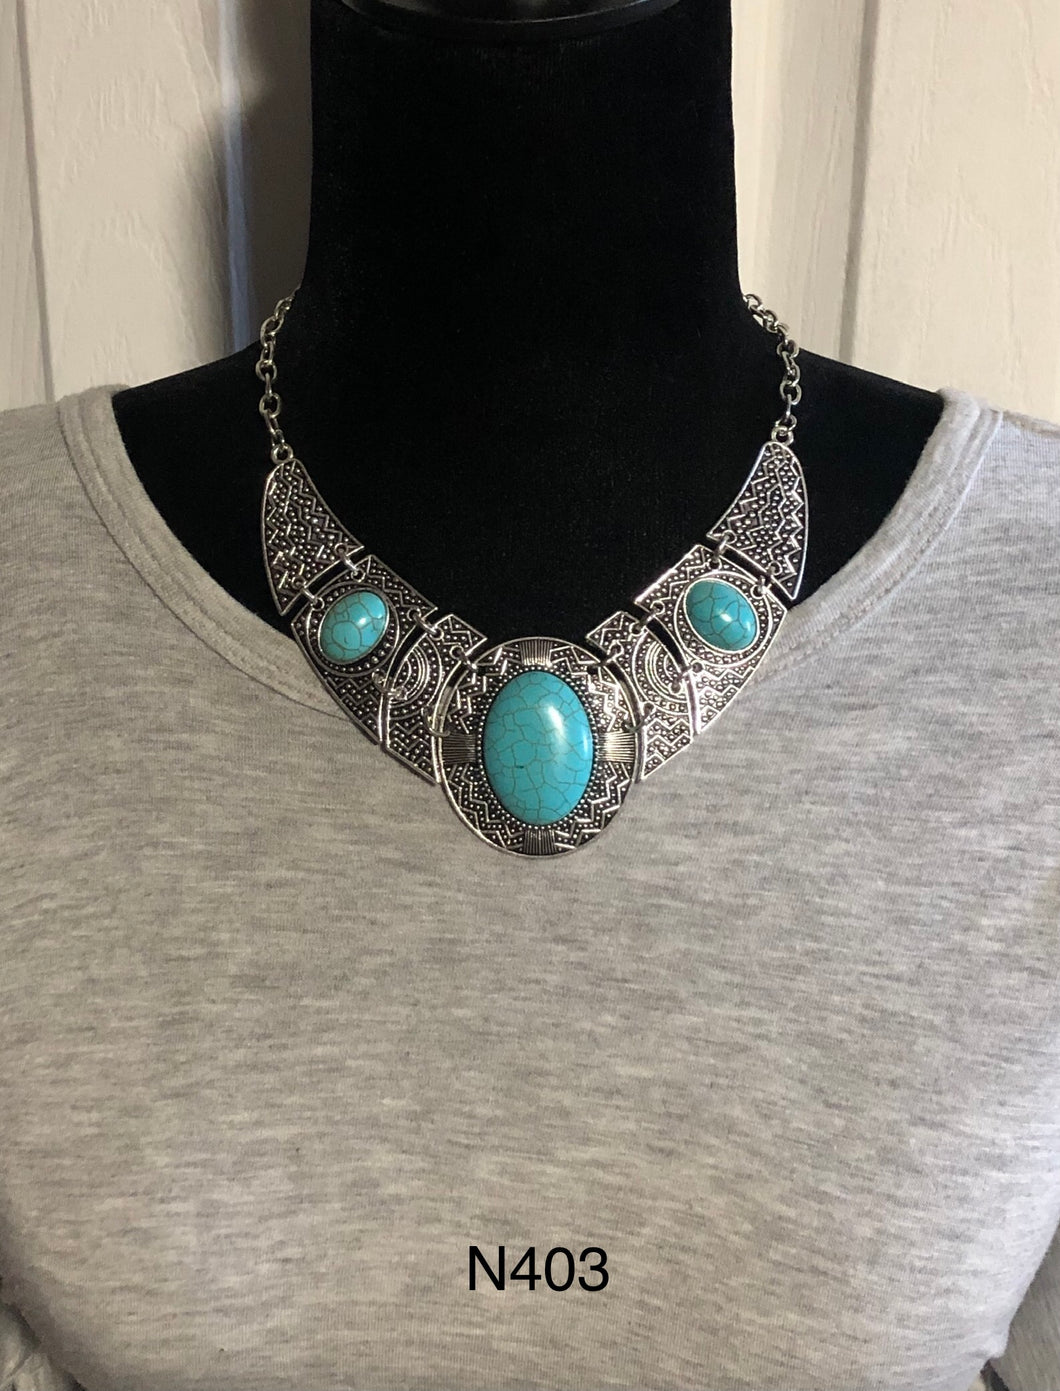 Leave Your LANDMARK - Blue / Turquoise Stones - Silver Necklace